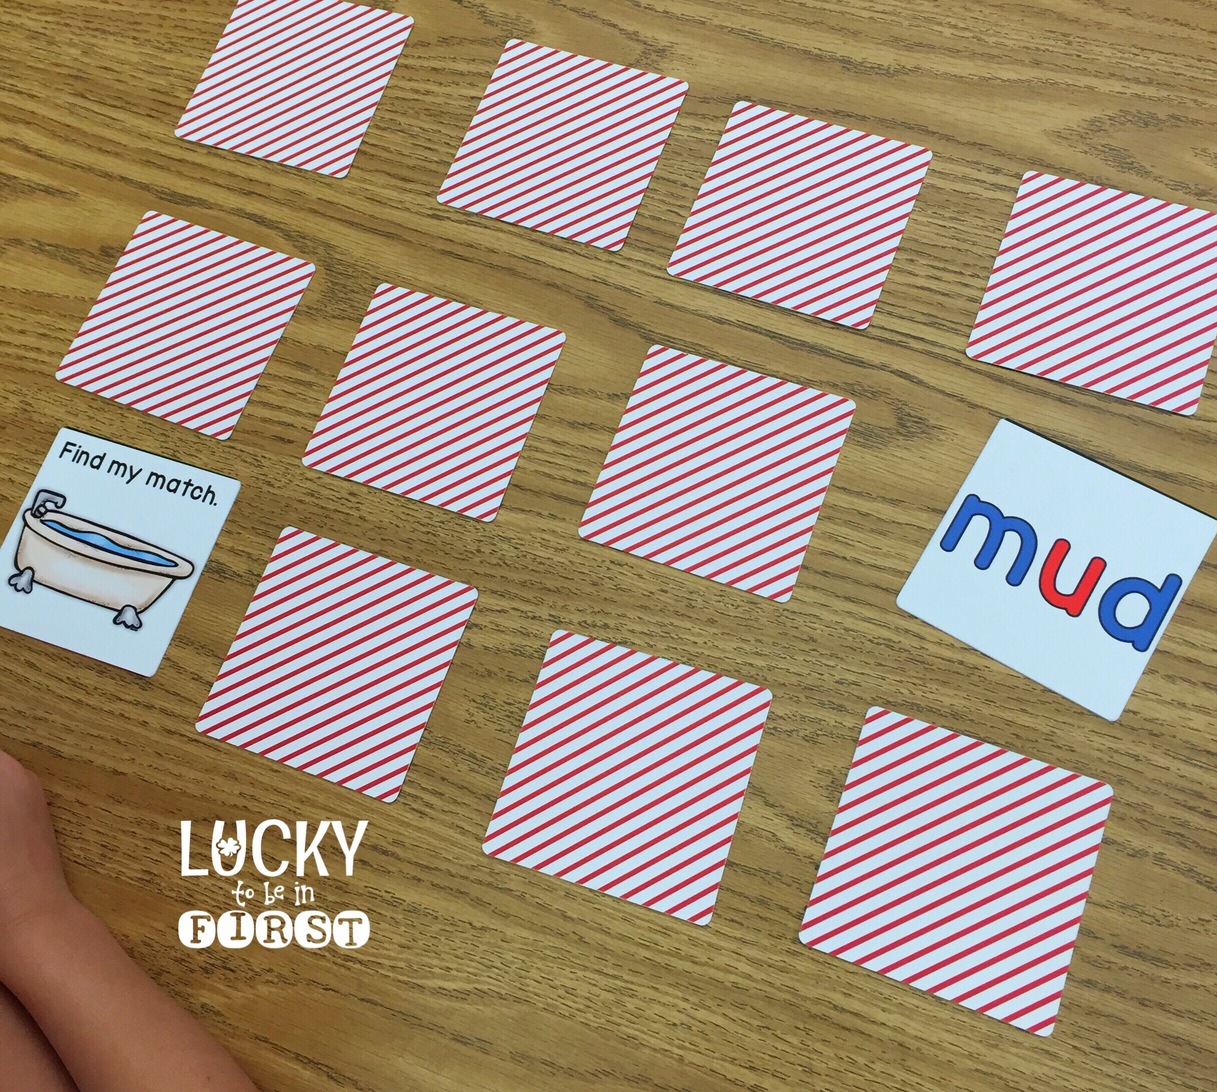 Short U Memory Game using Shutterfly Puzzles | Lucky Learning with Molly Lynch